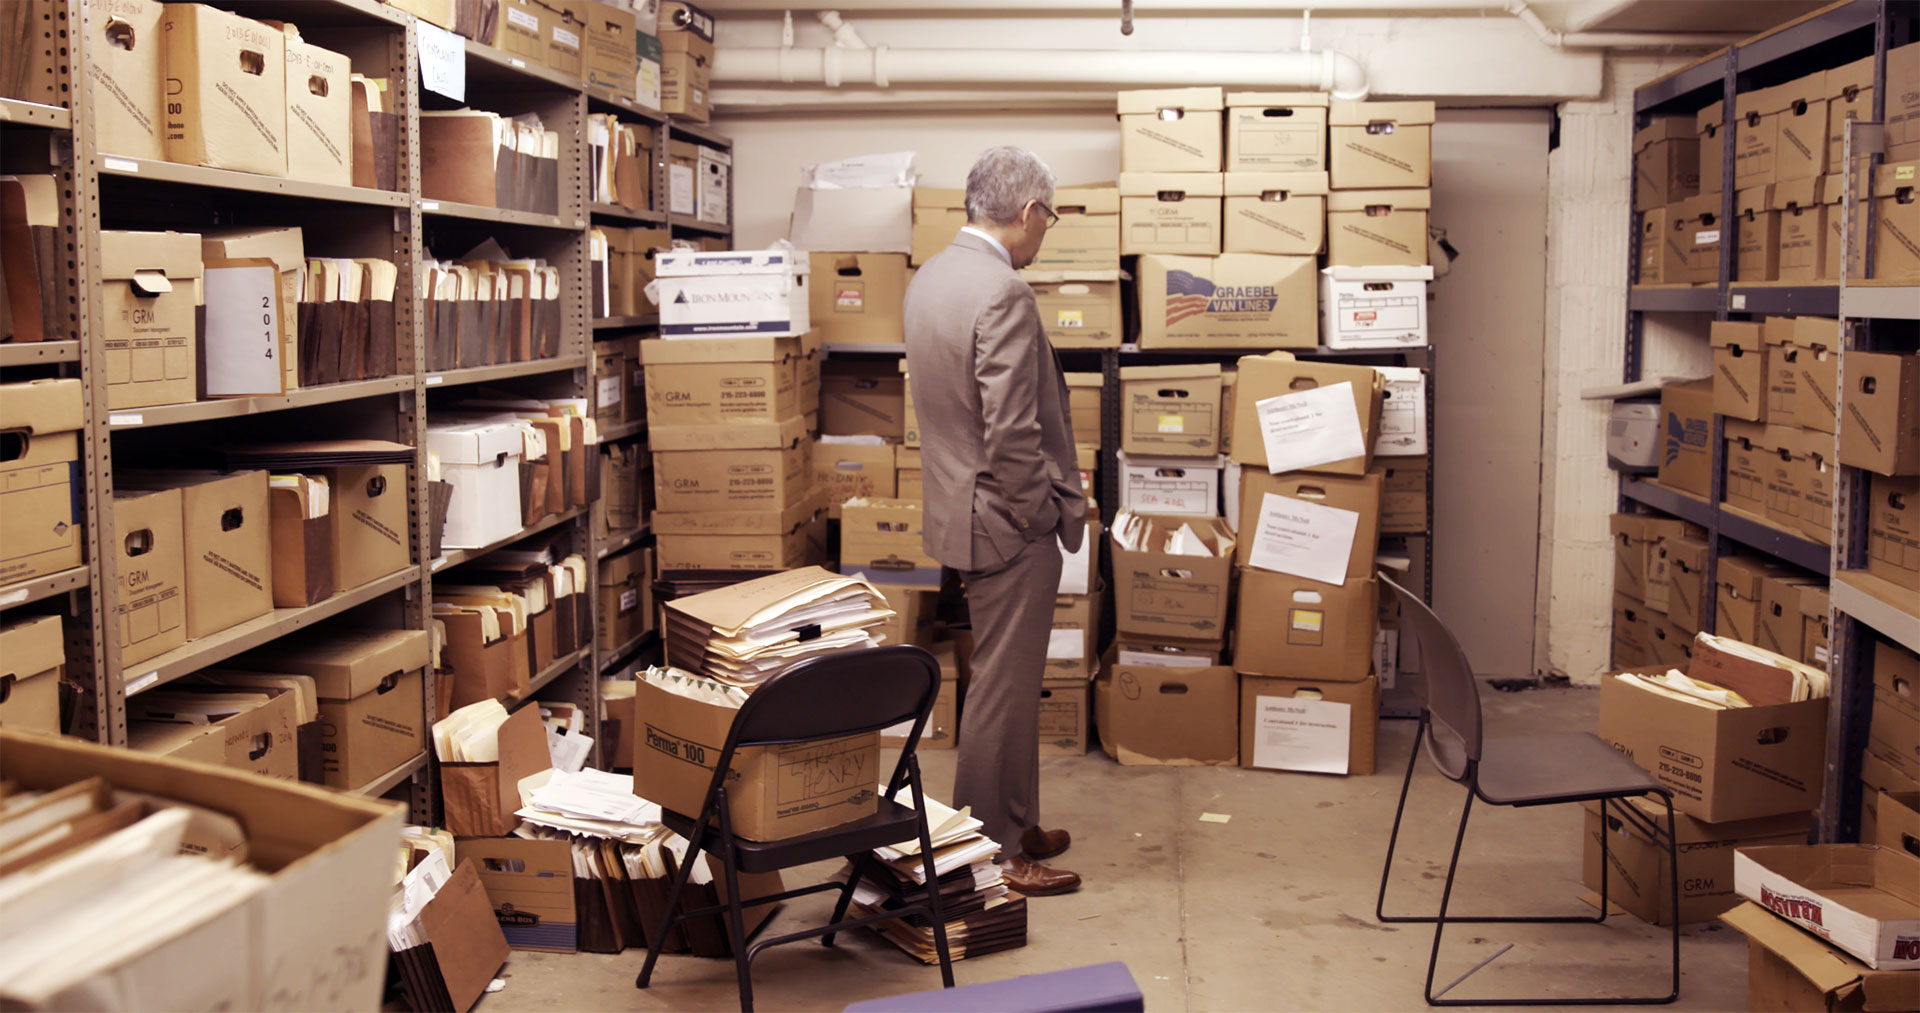 Larry Krasner looks over a ton of file boxes from way back, in Philly D.A.